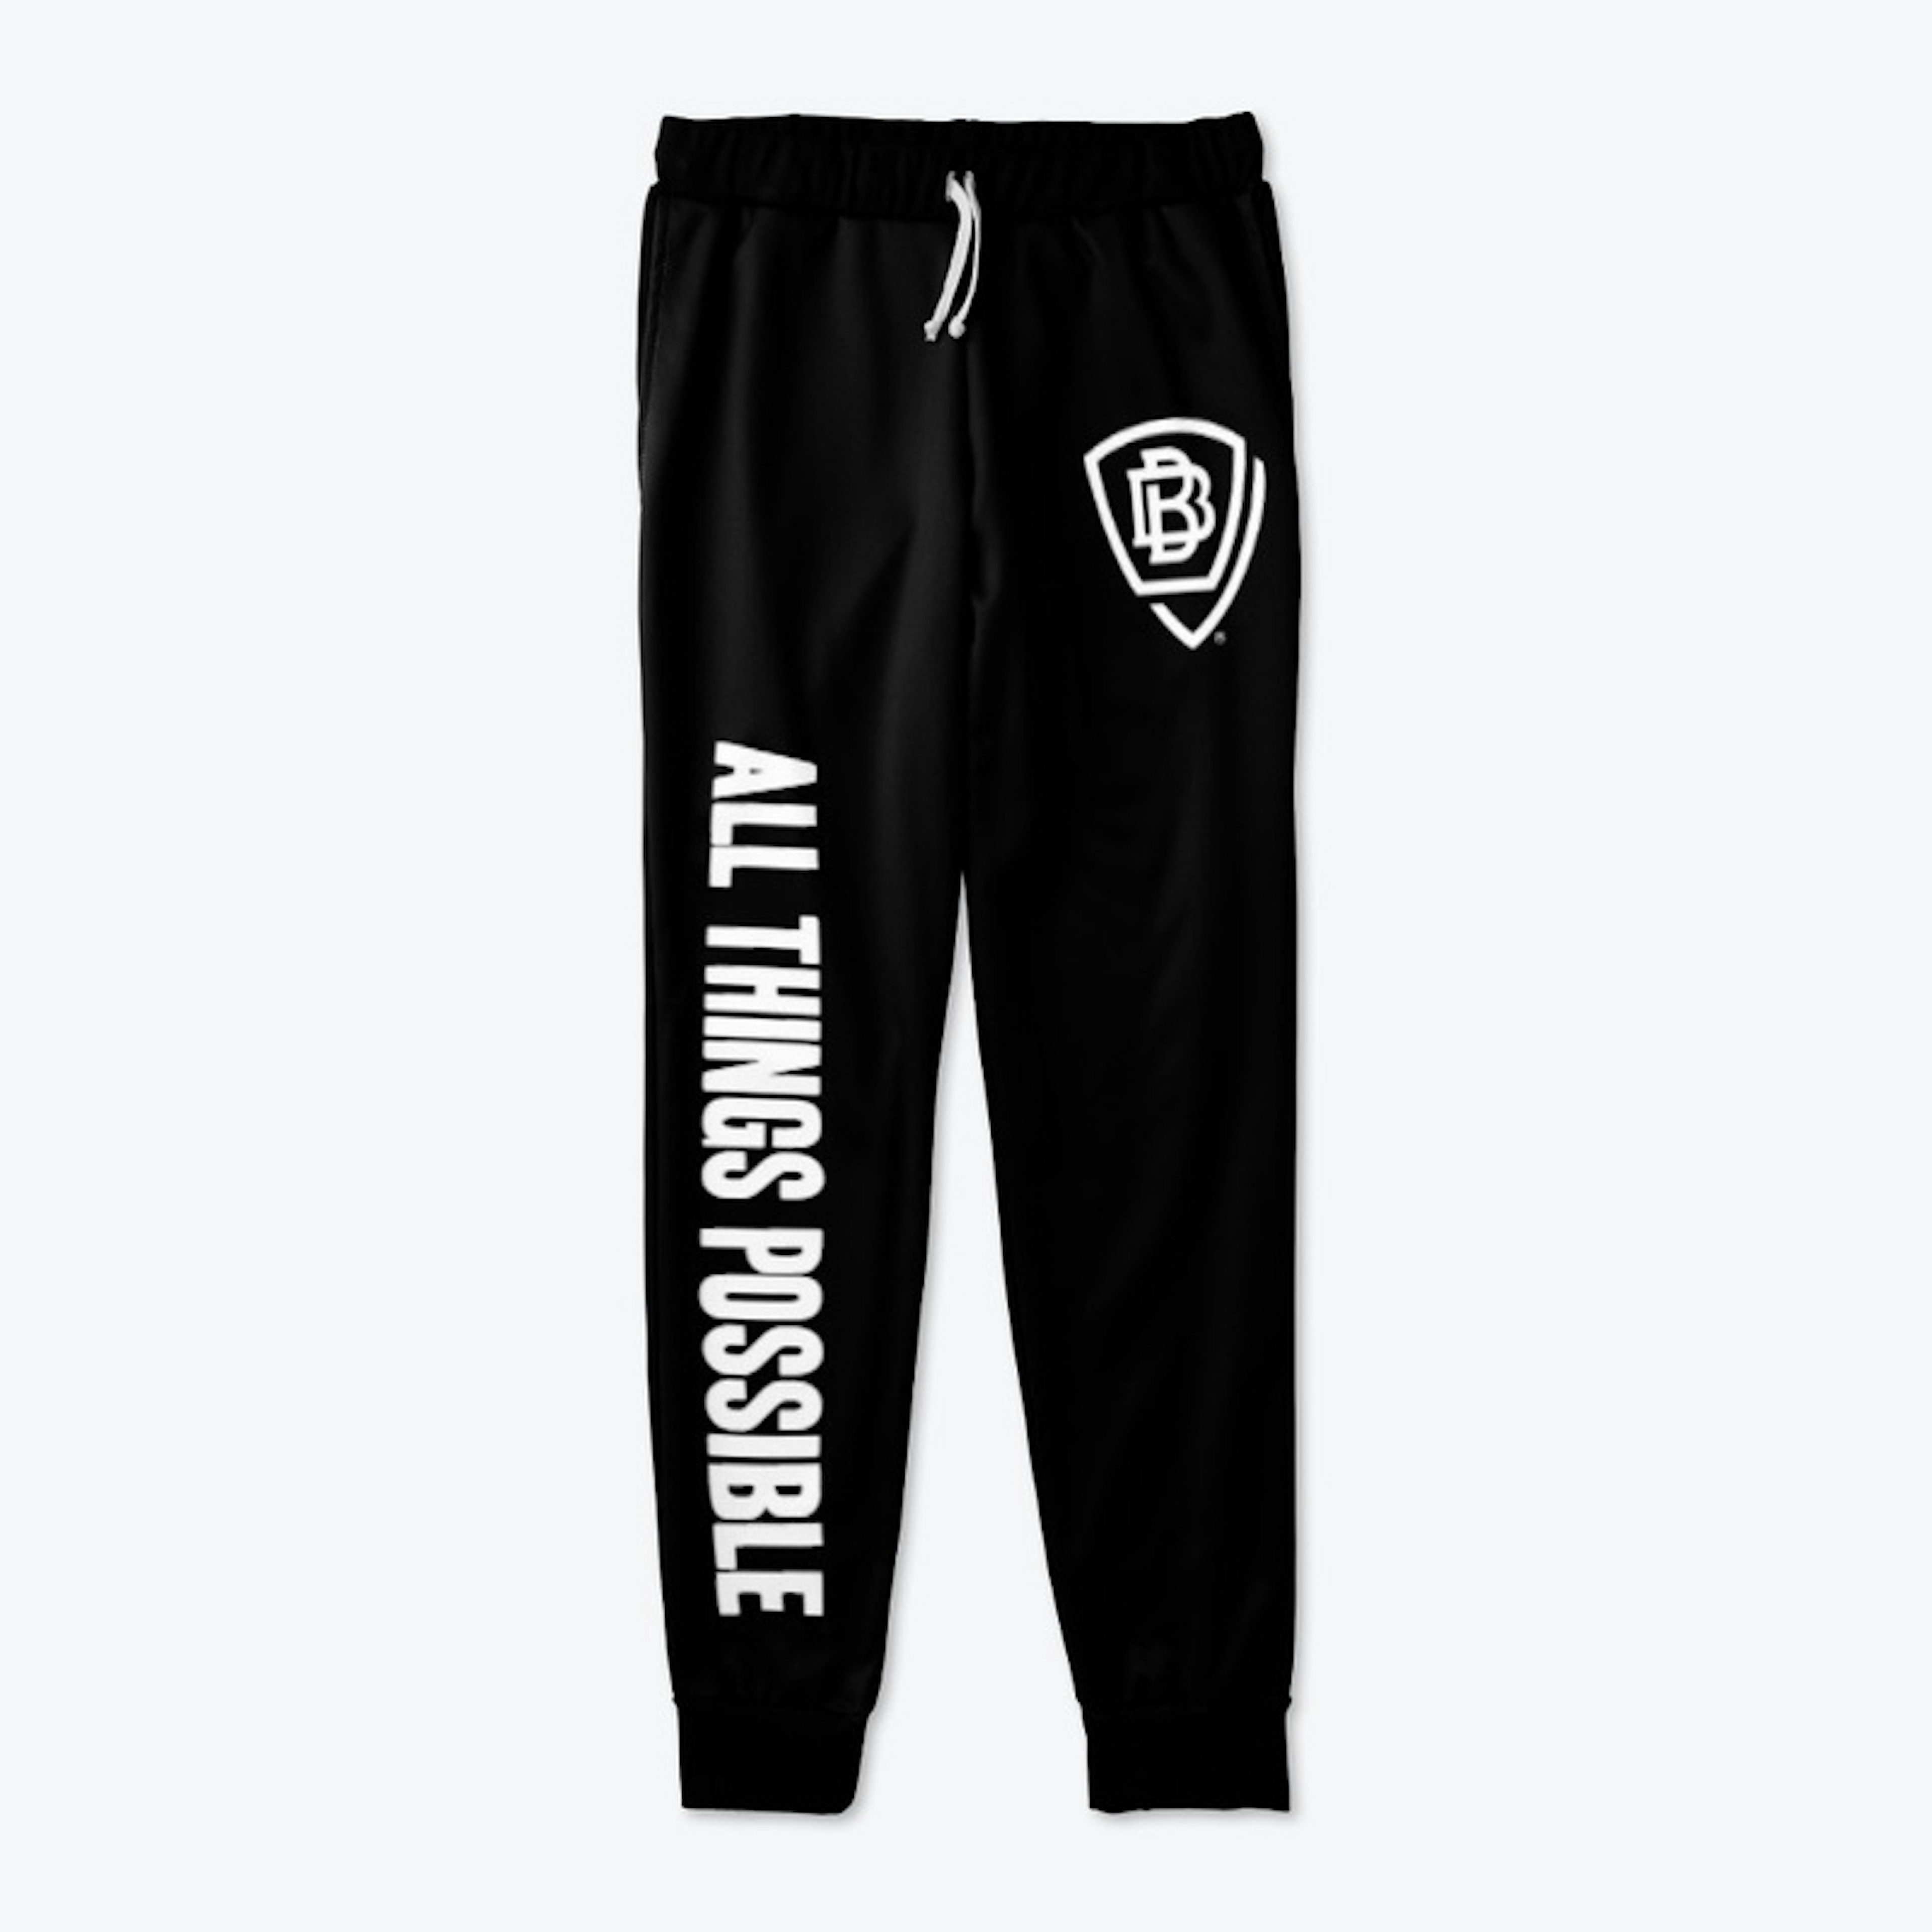 All things possible joggers